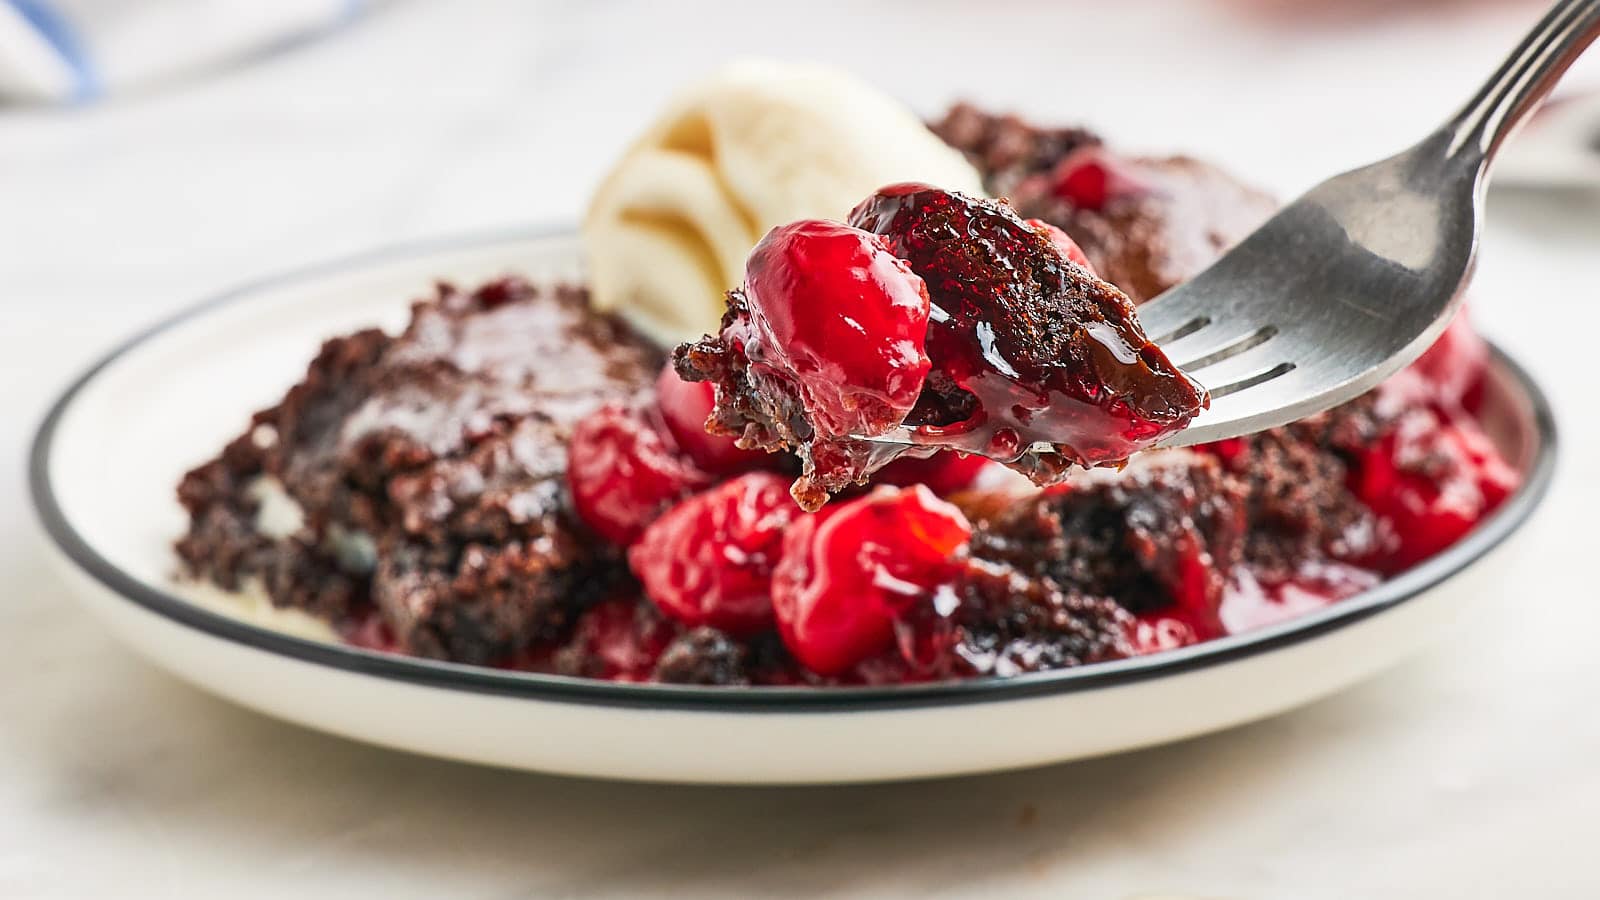 Black Forest Dump Cake recipe by Cheerful Cook.com